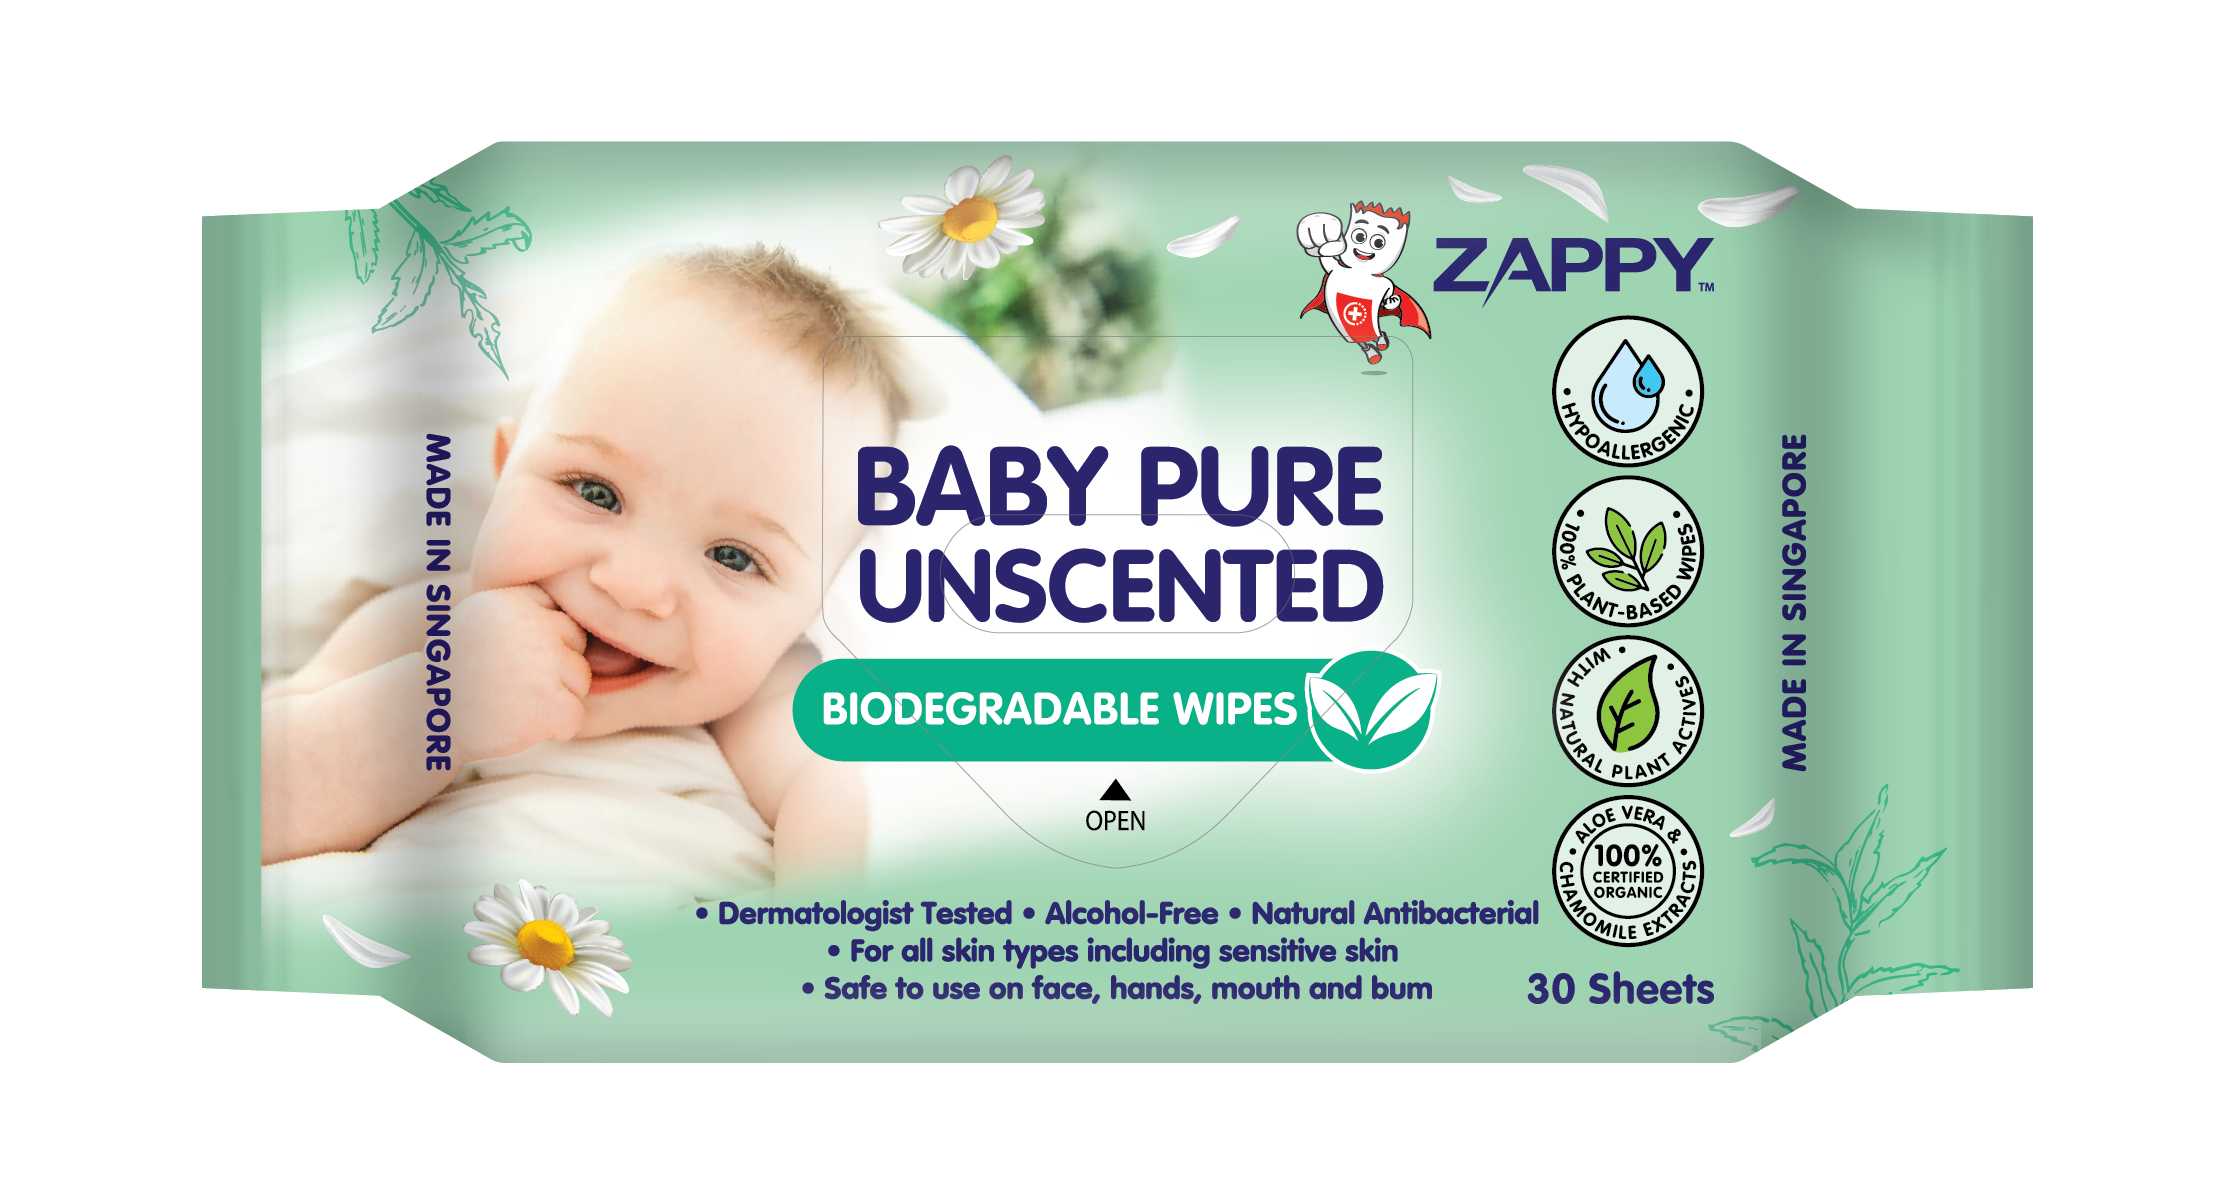 ZAPPY BABY PURE BIO-D WIPES (UNSCENTED)
18 packets X 80 sheets + 24 packets X 30 sheets